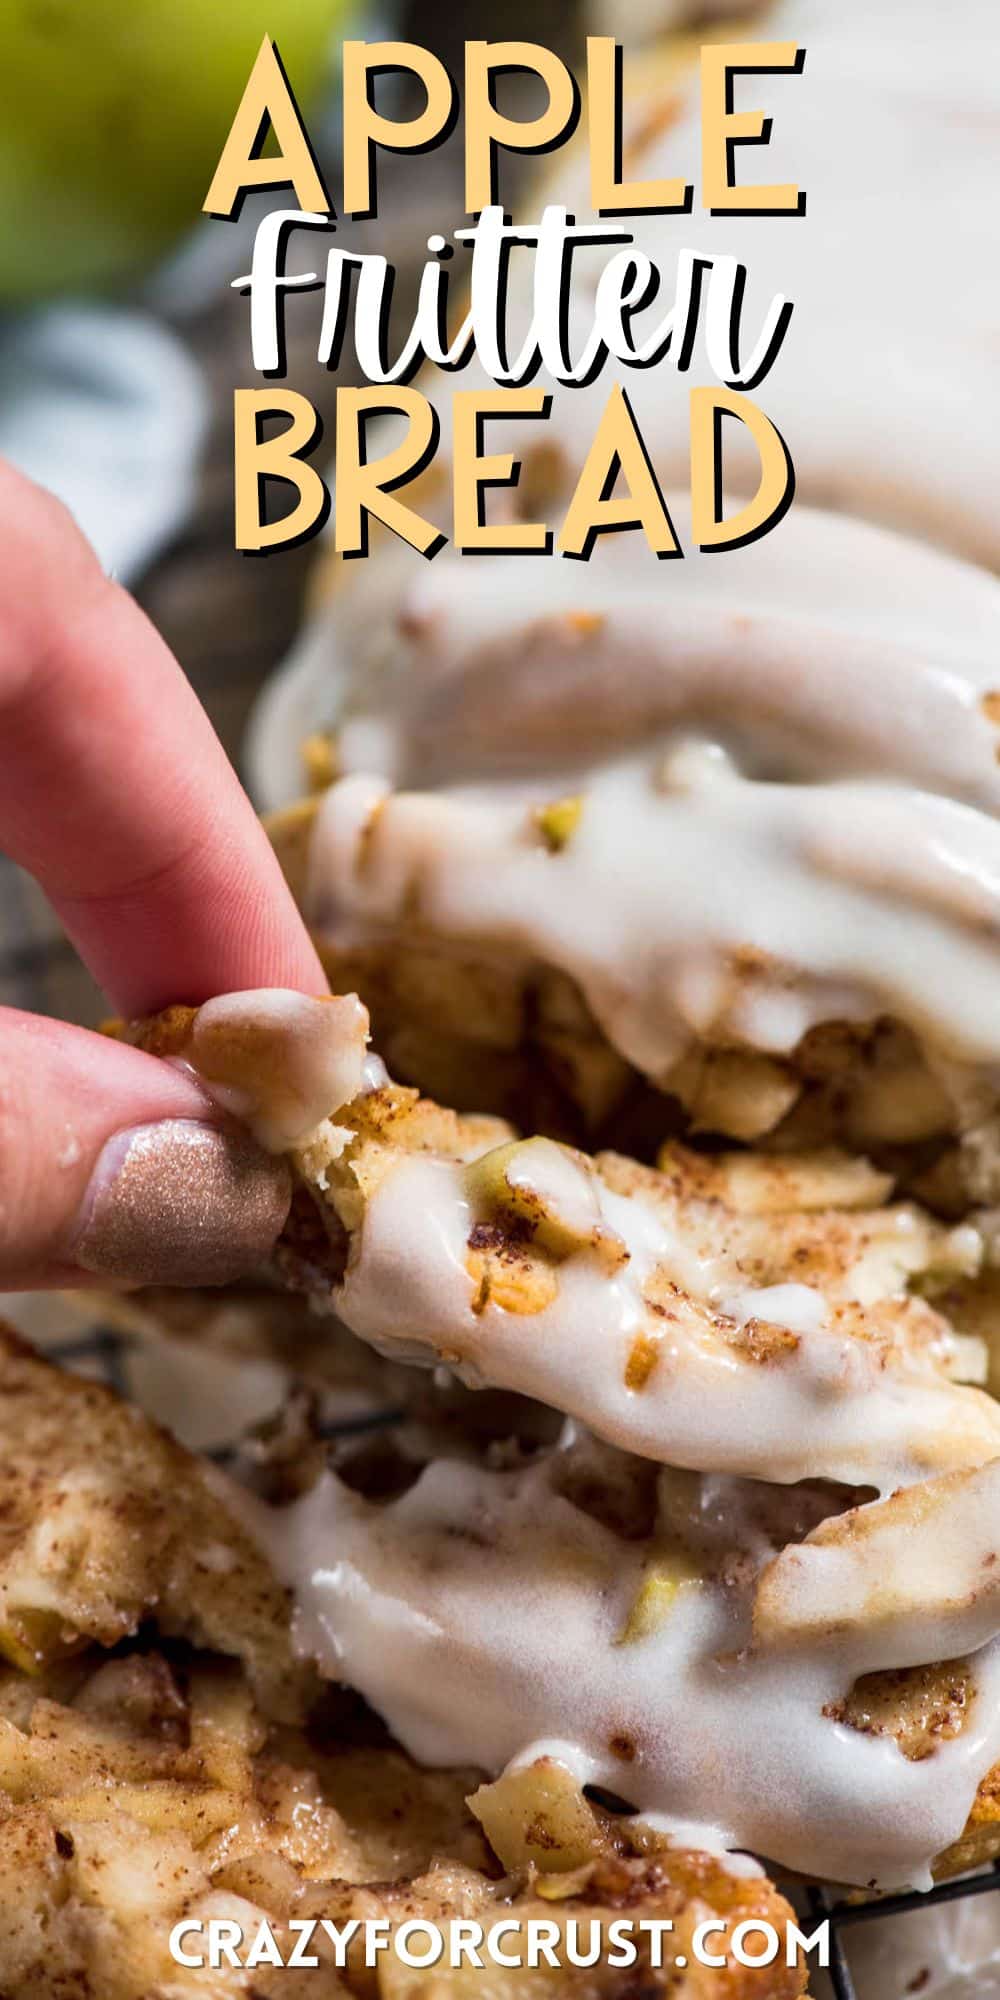 sliced apple fritter bread with white icing on top with words on the image.